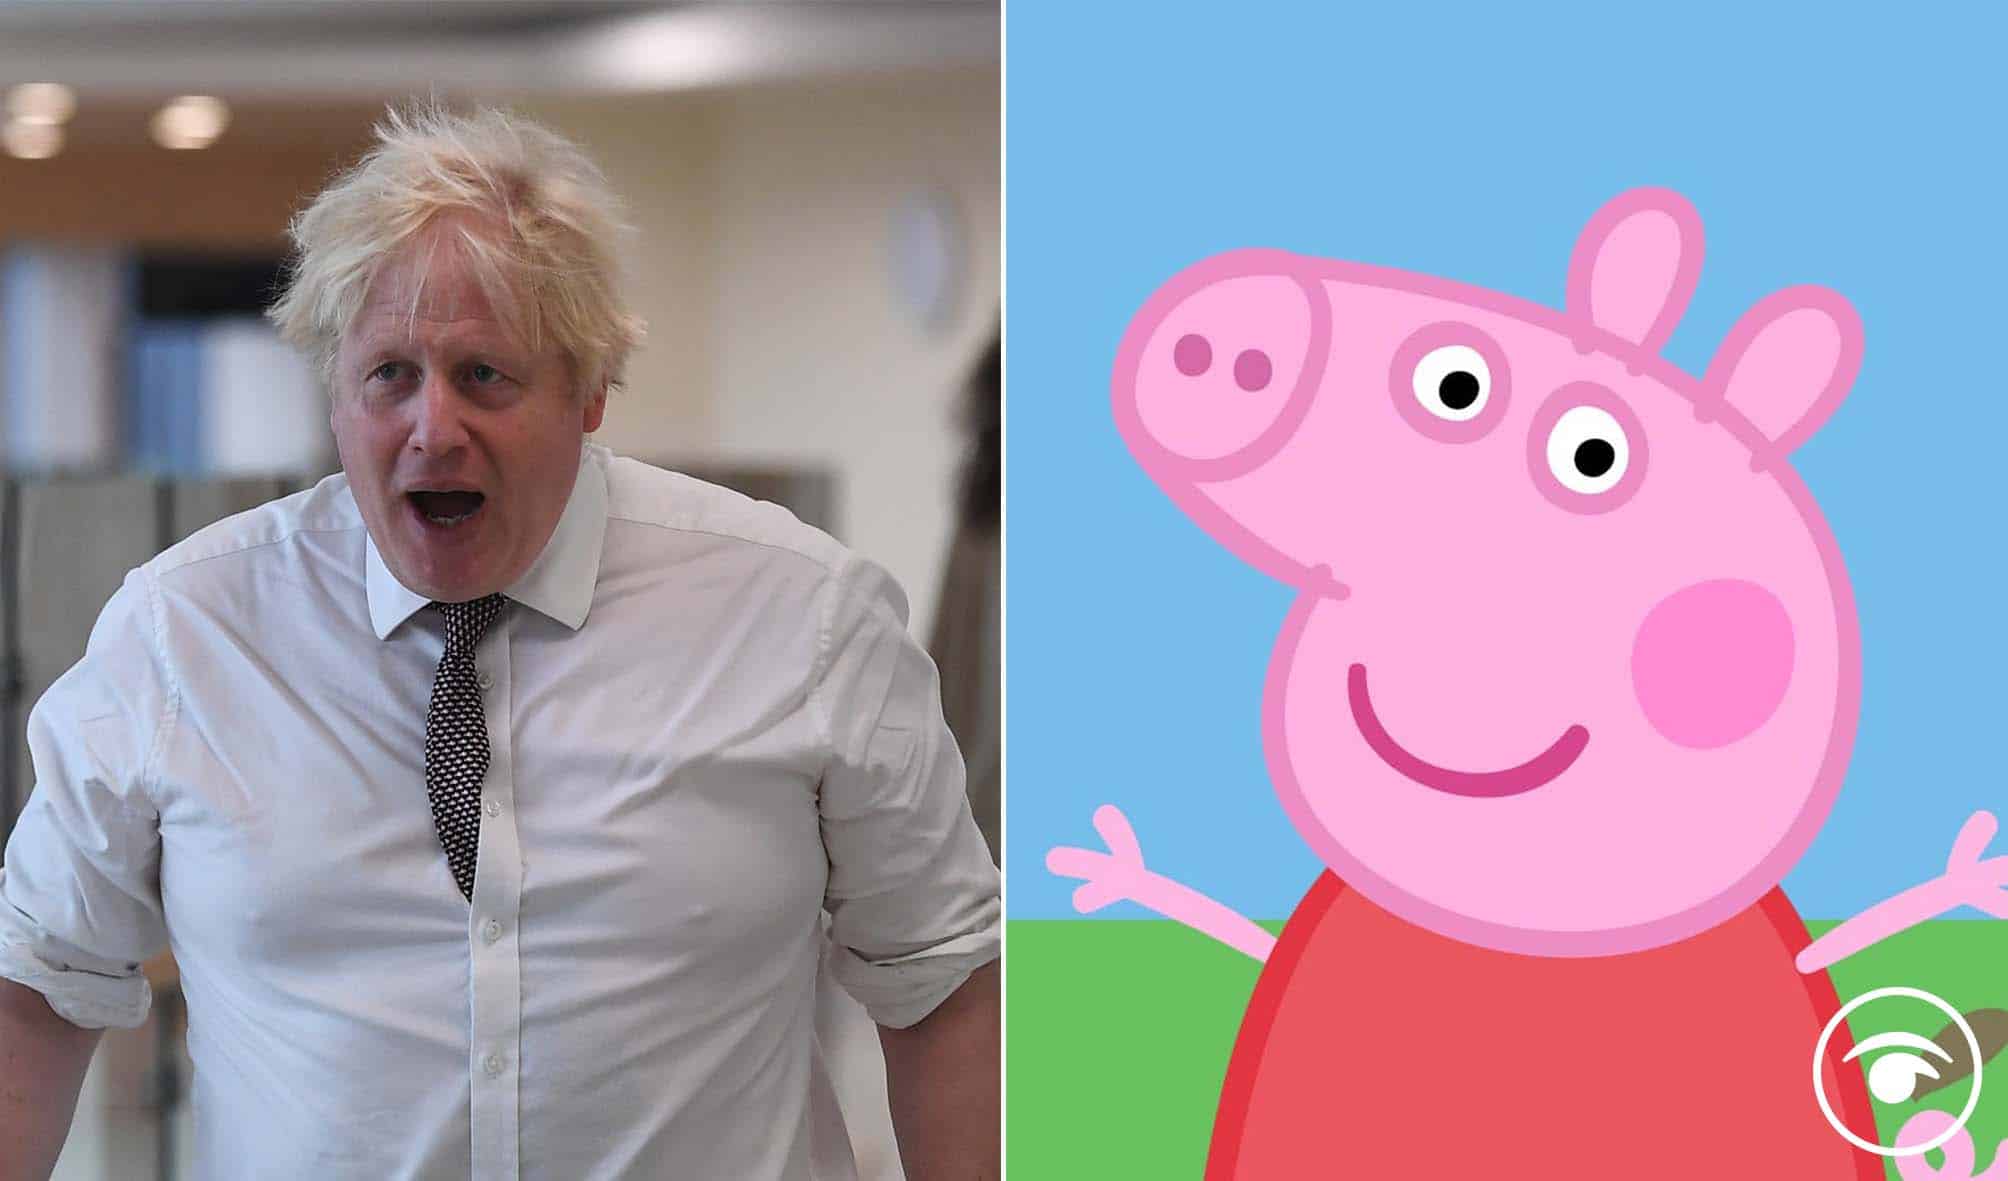 Defending the indefensible? – Daily Mail says ‘don’t sneer’ at Johnson’s fixation with Peppa Pig